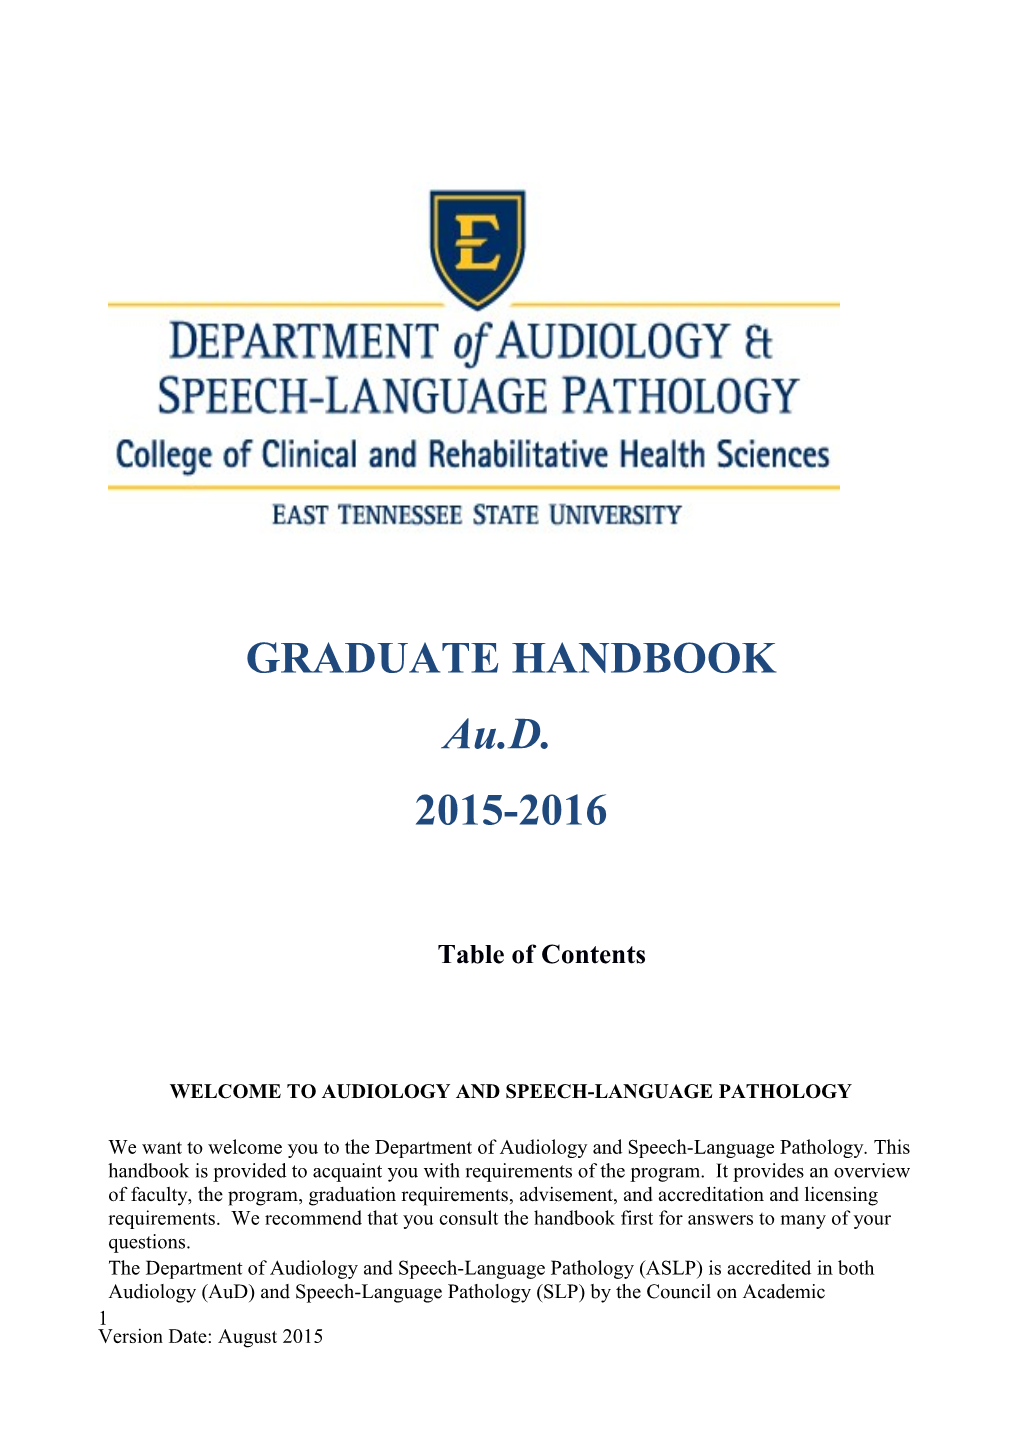 Welcome to Audiology and Speech-Language Pathology 3